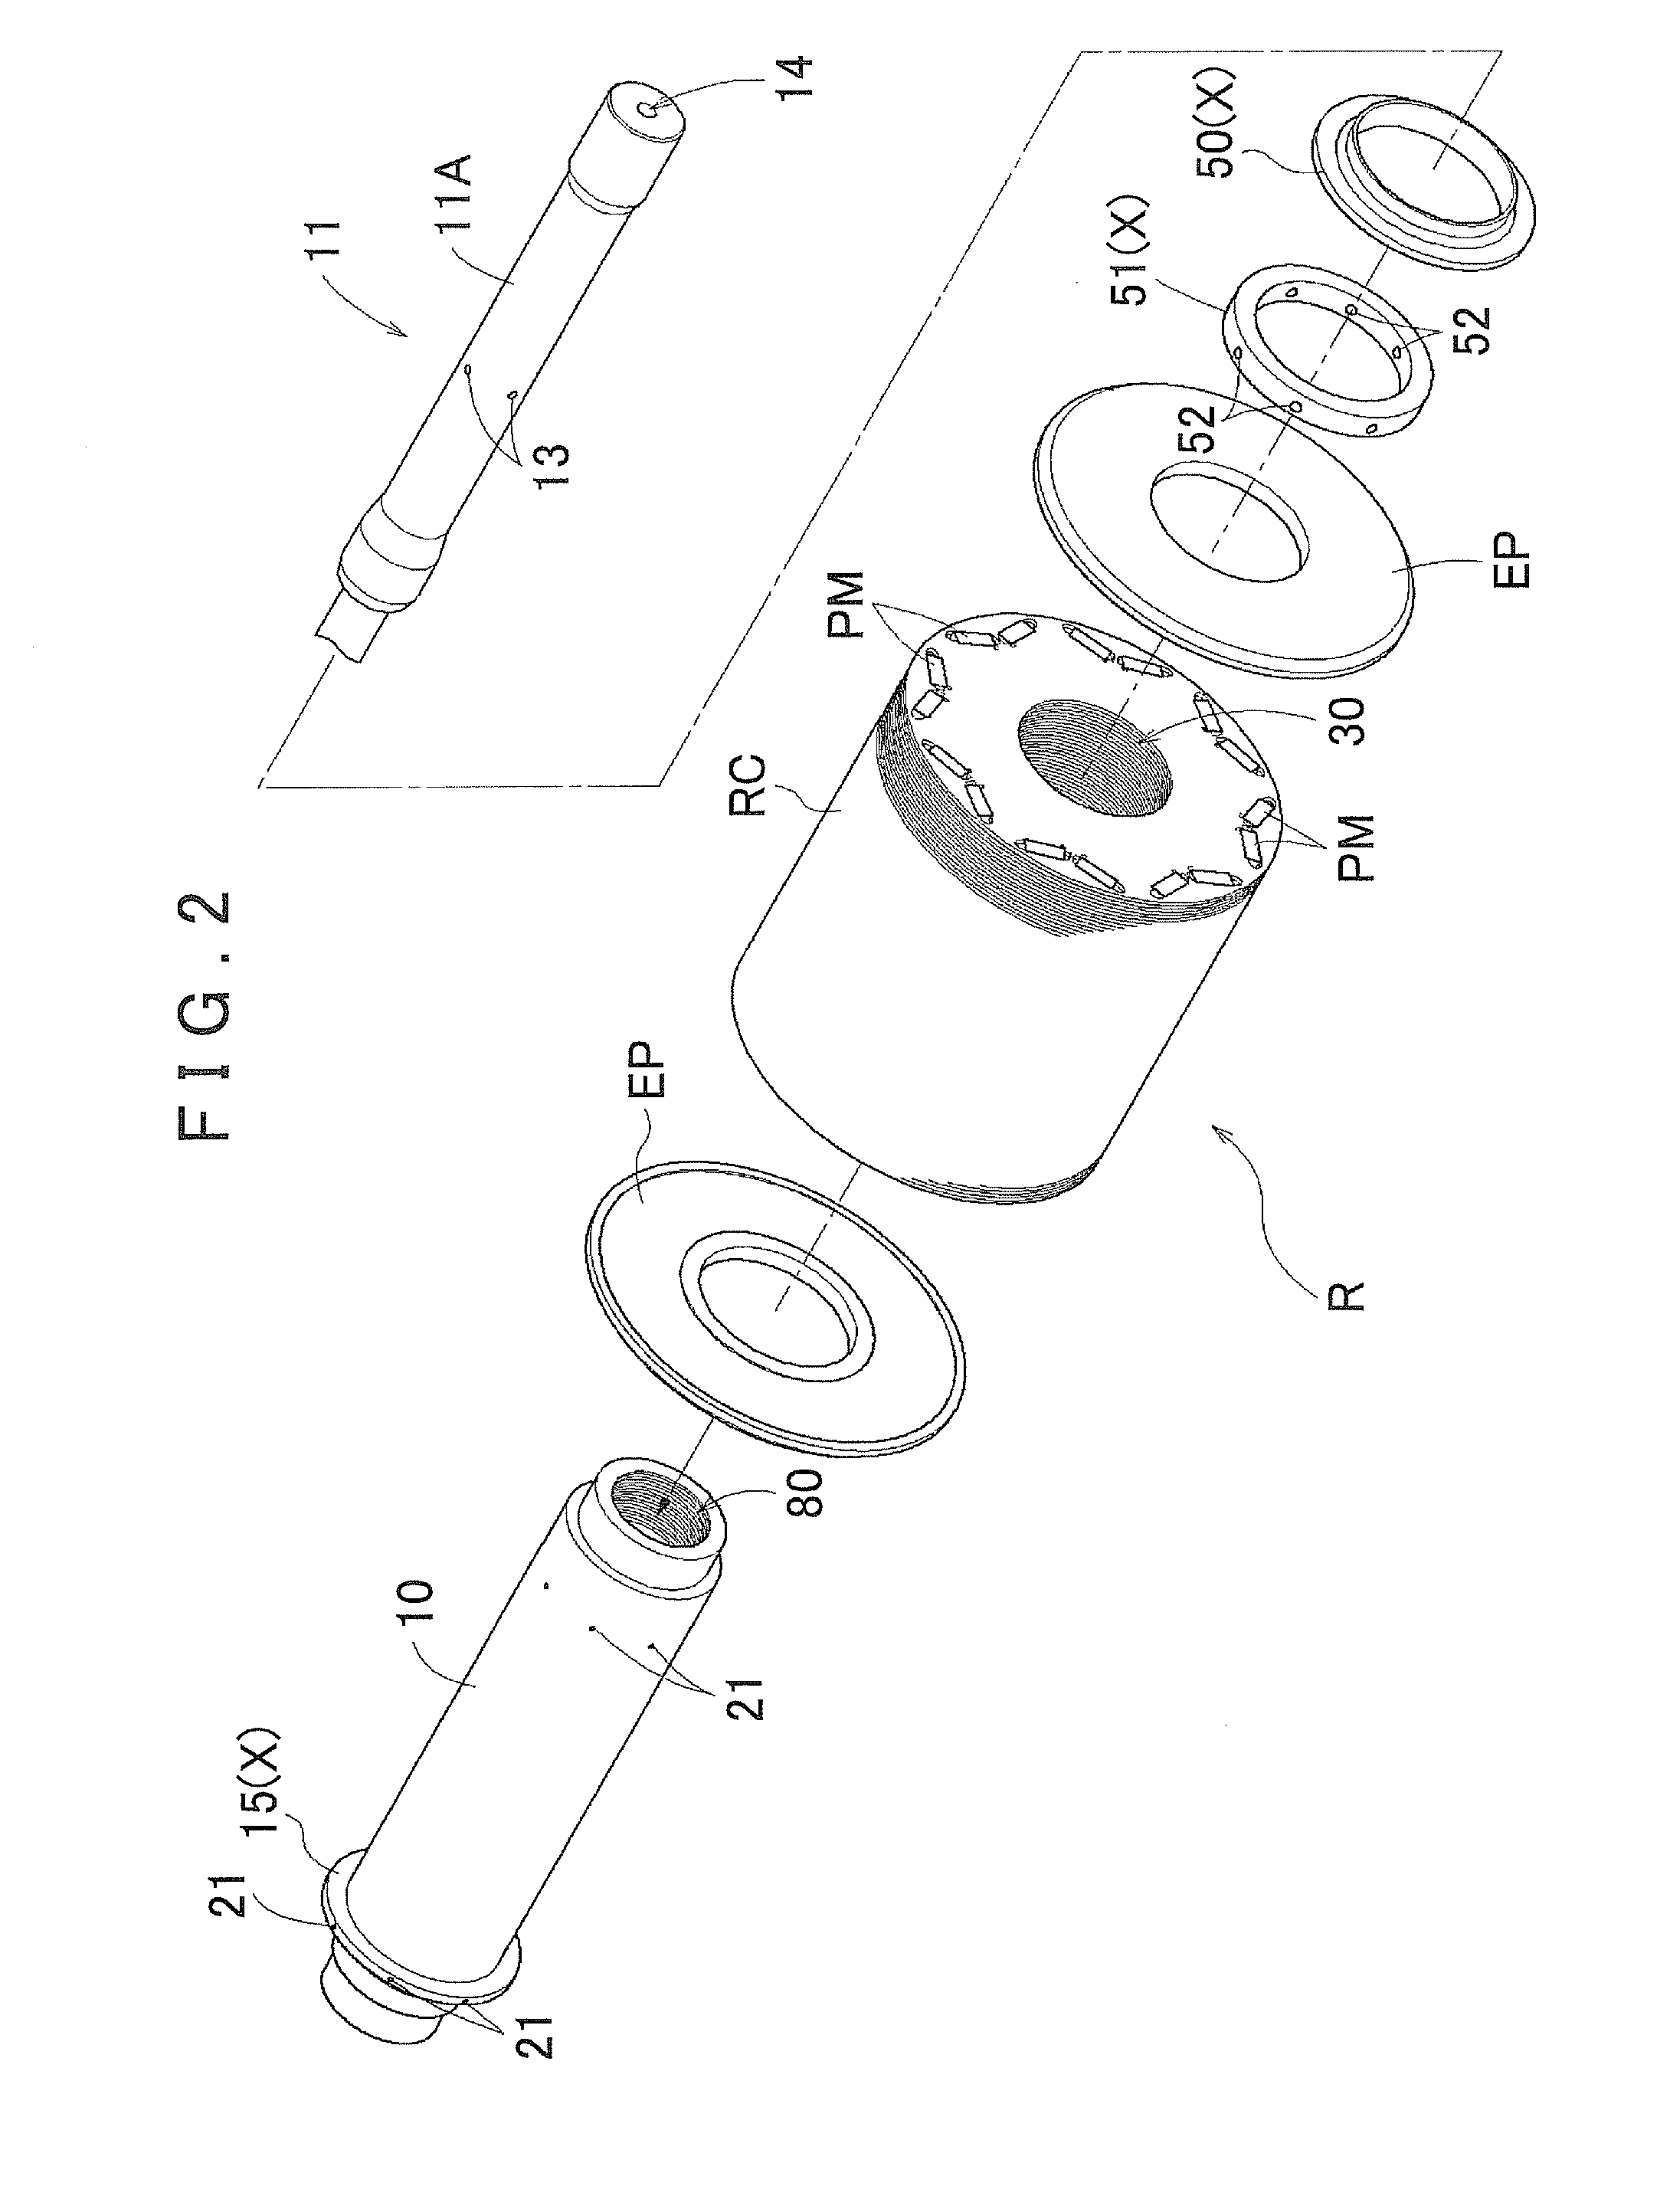 Rotor for rotating electric machine